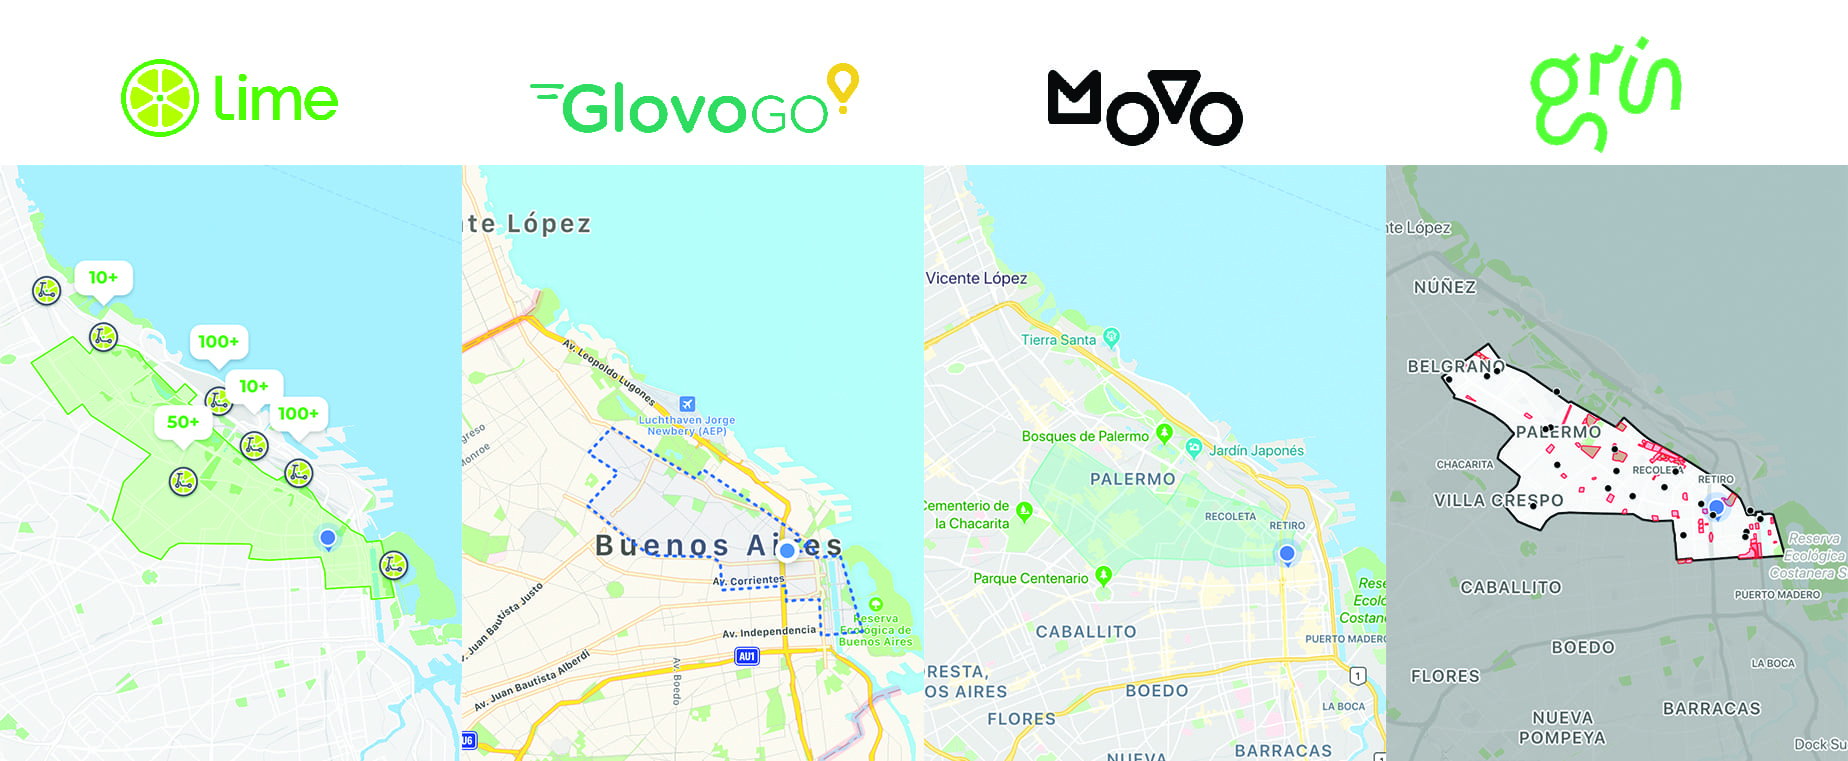 glovoGO-Lime-Grin-Movo-map